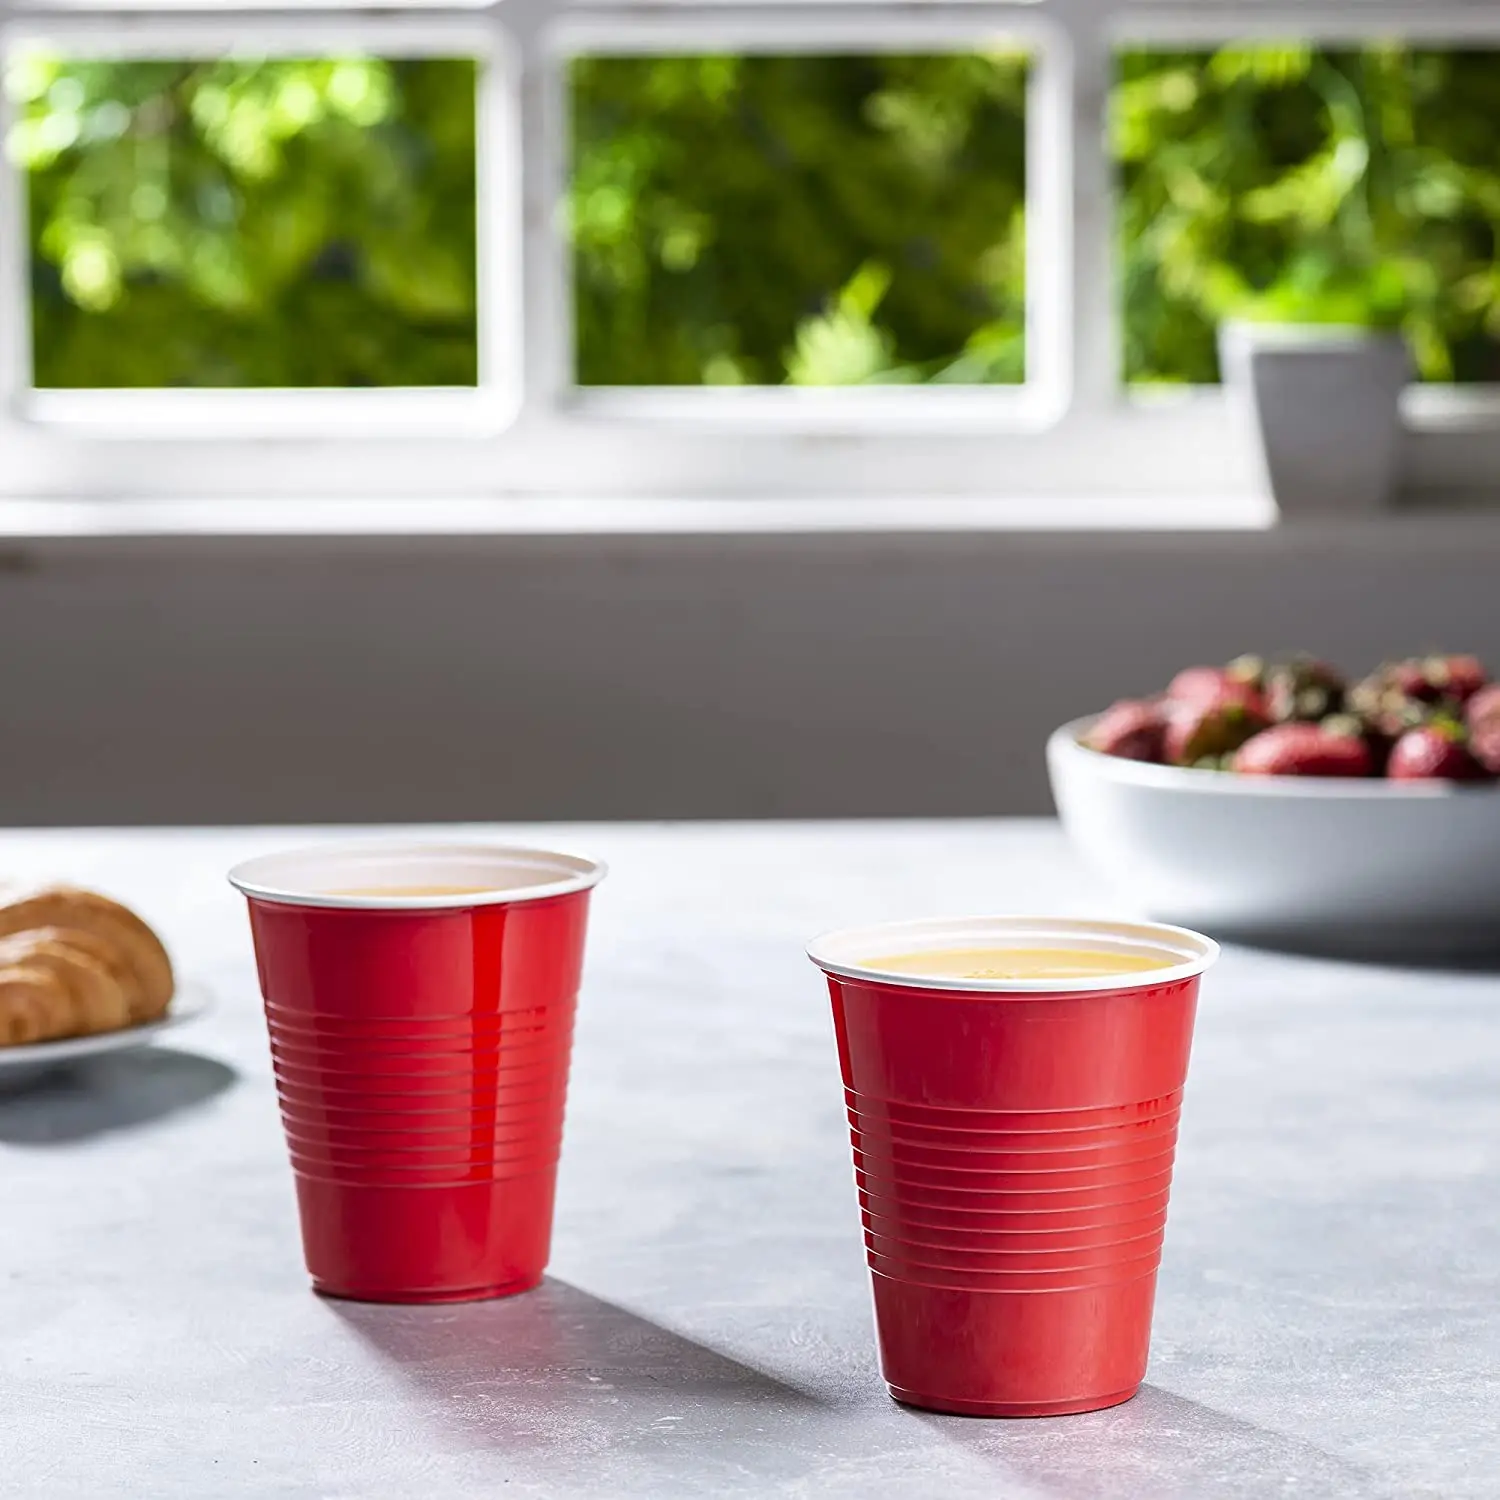 https://ae01.alicdn.com/kf/S66763746726142d9ae289adde11e3202c/25pcs-Red-Drinking-Cups-Party-Cup-Disposable-Cup-Disposable-Party-Plastic-Cups-Big-Birthday-Party-Cups.jpg